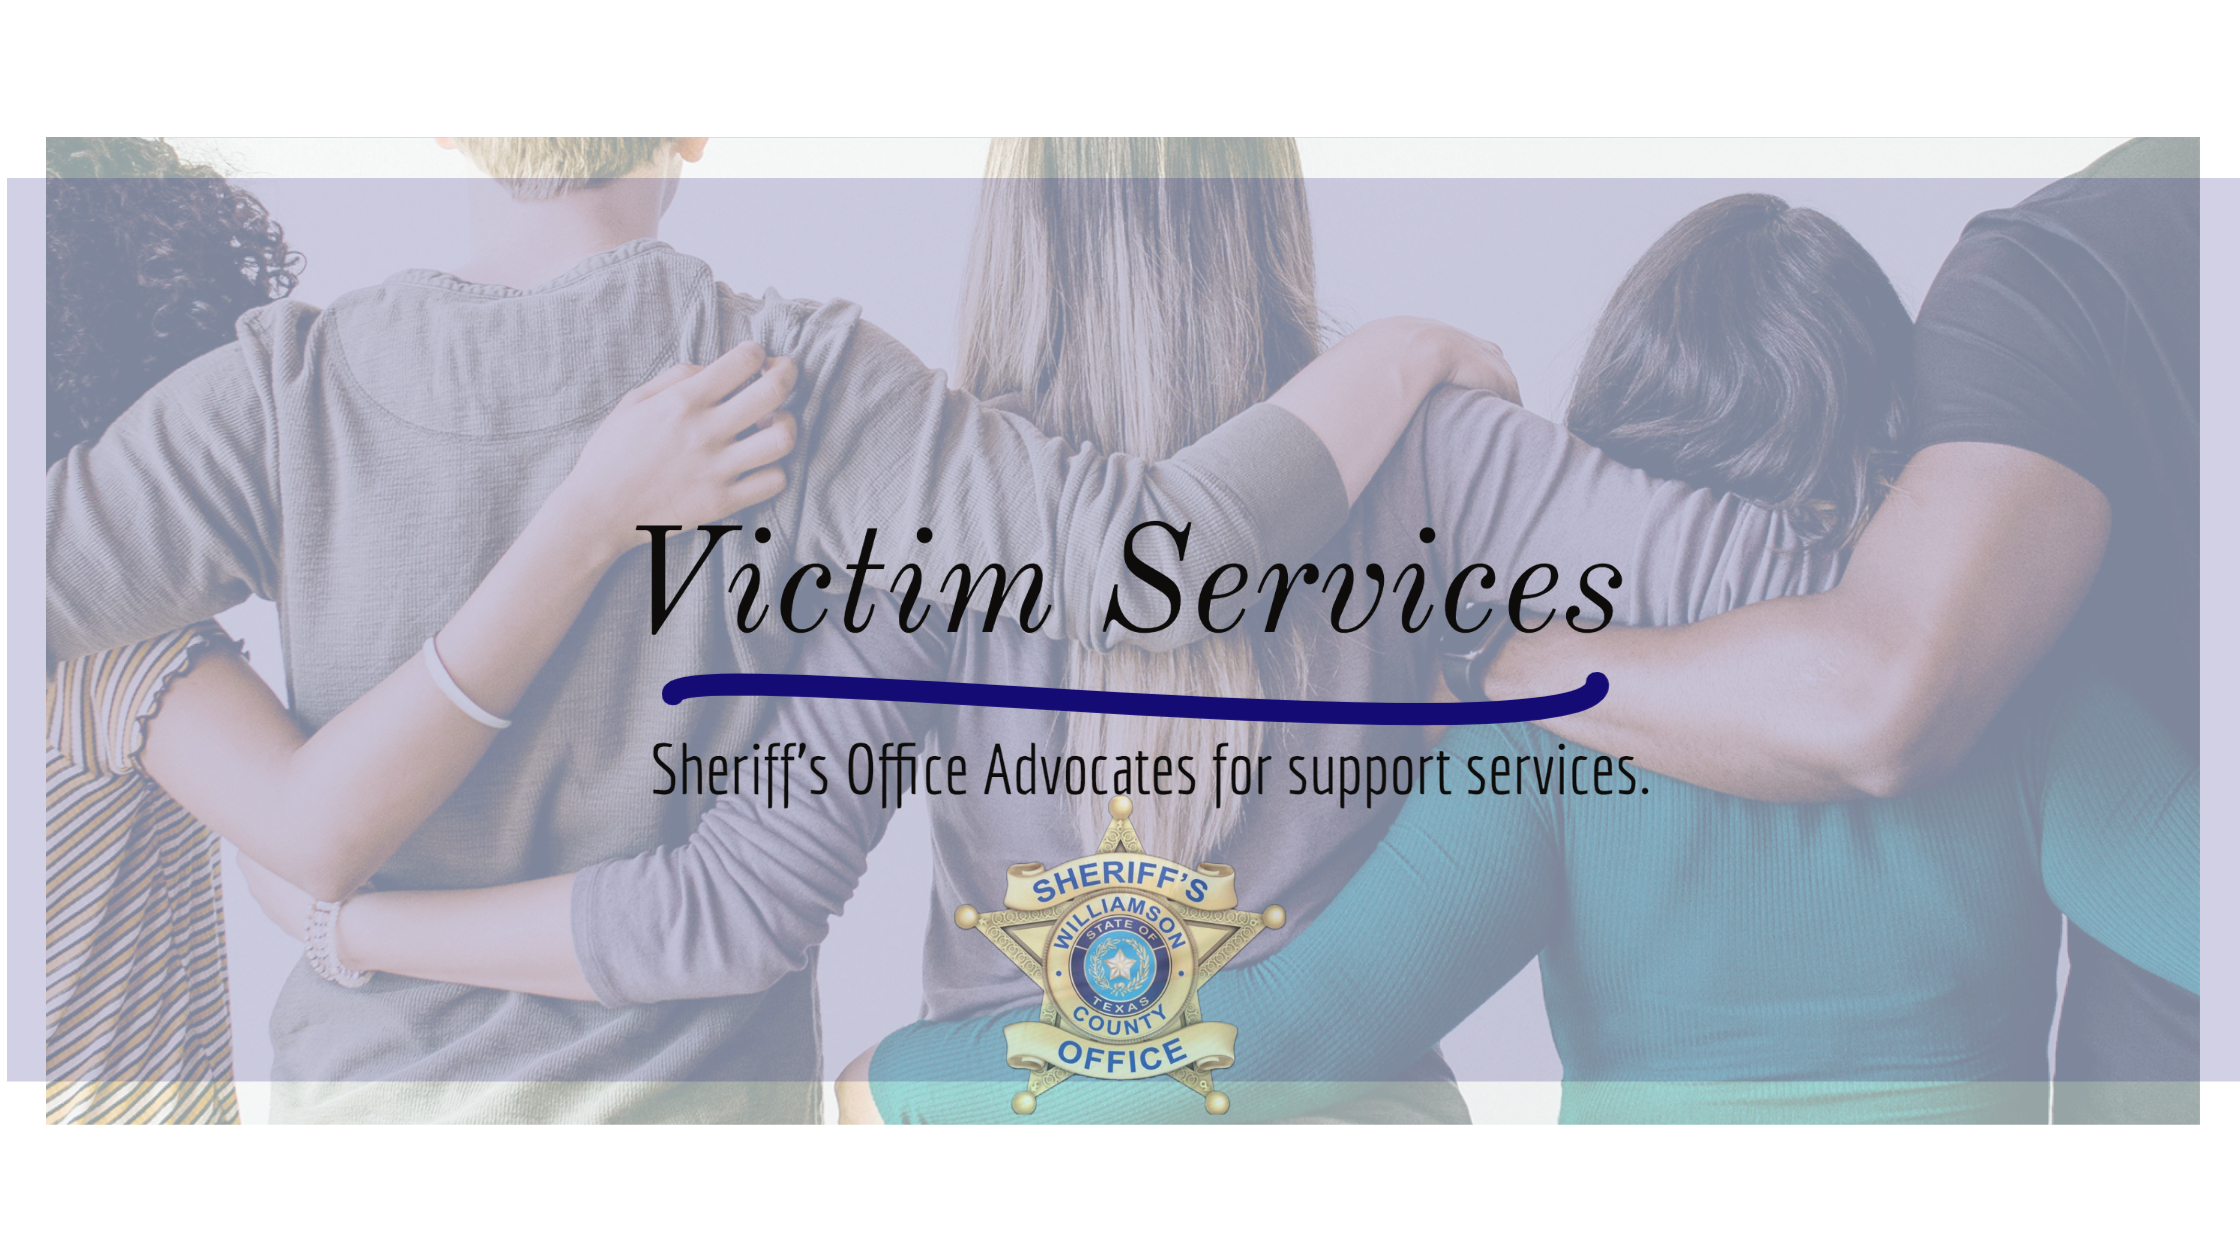 Victim Services- Advocates for support services